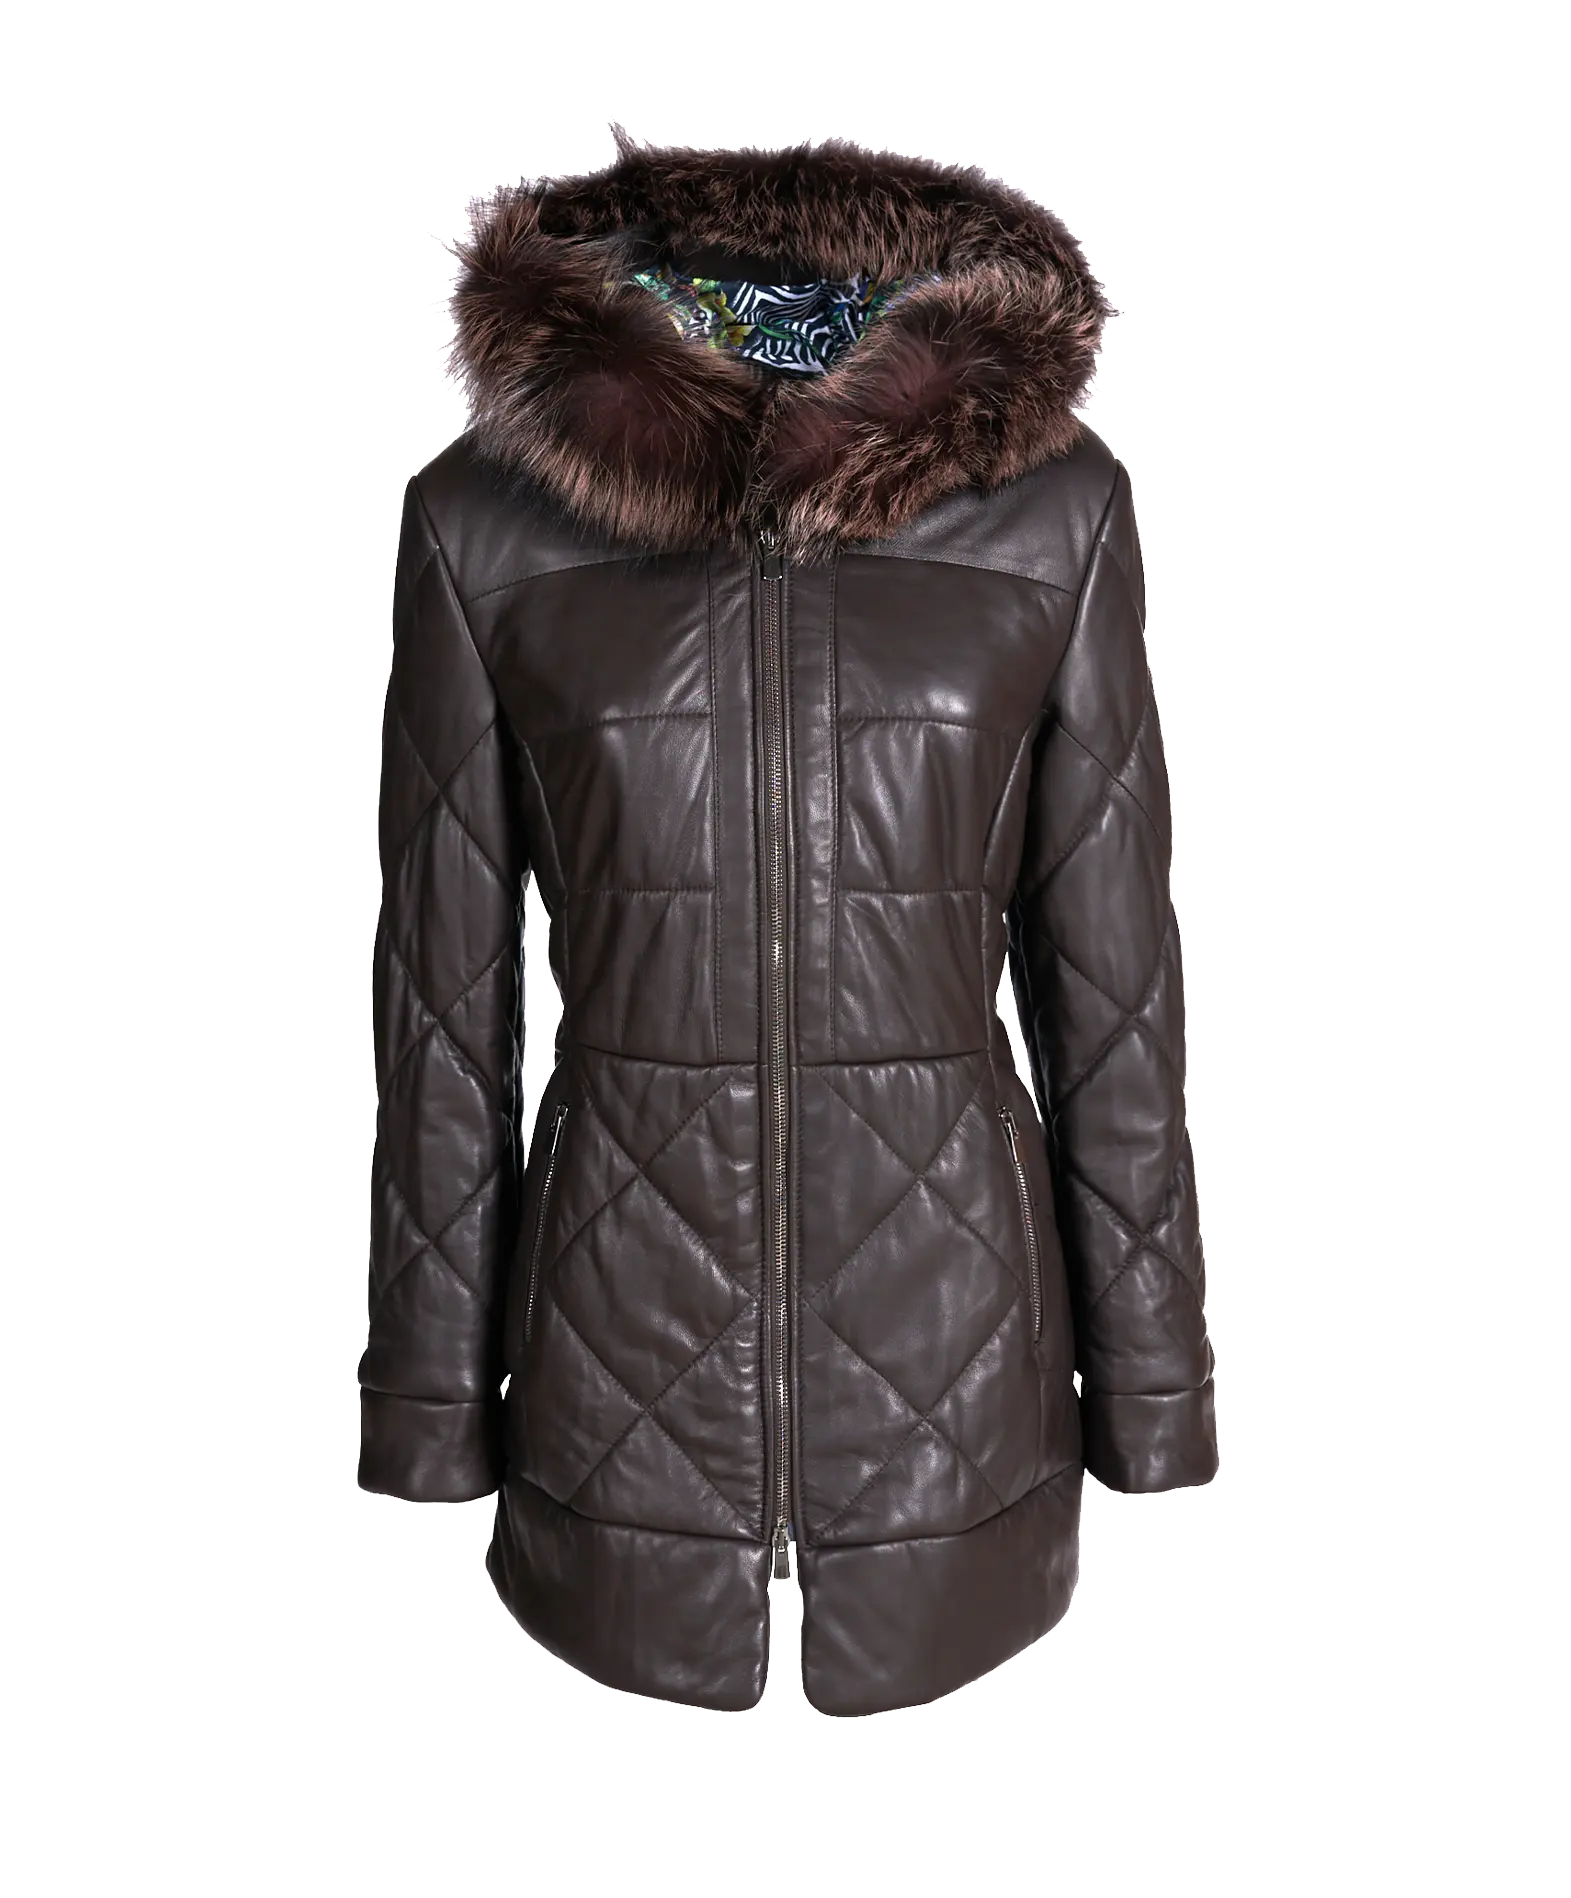 Made in Italy dark brown down leather jacket womens OEM services top quality 100% Italian leather jackets winter daily outerwear